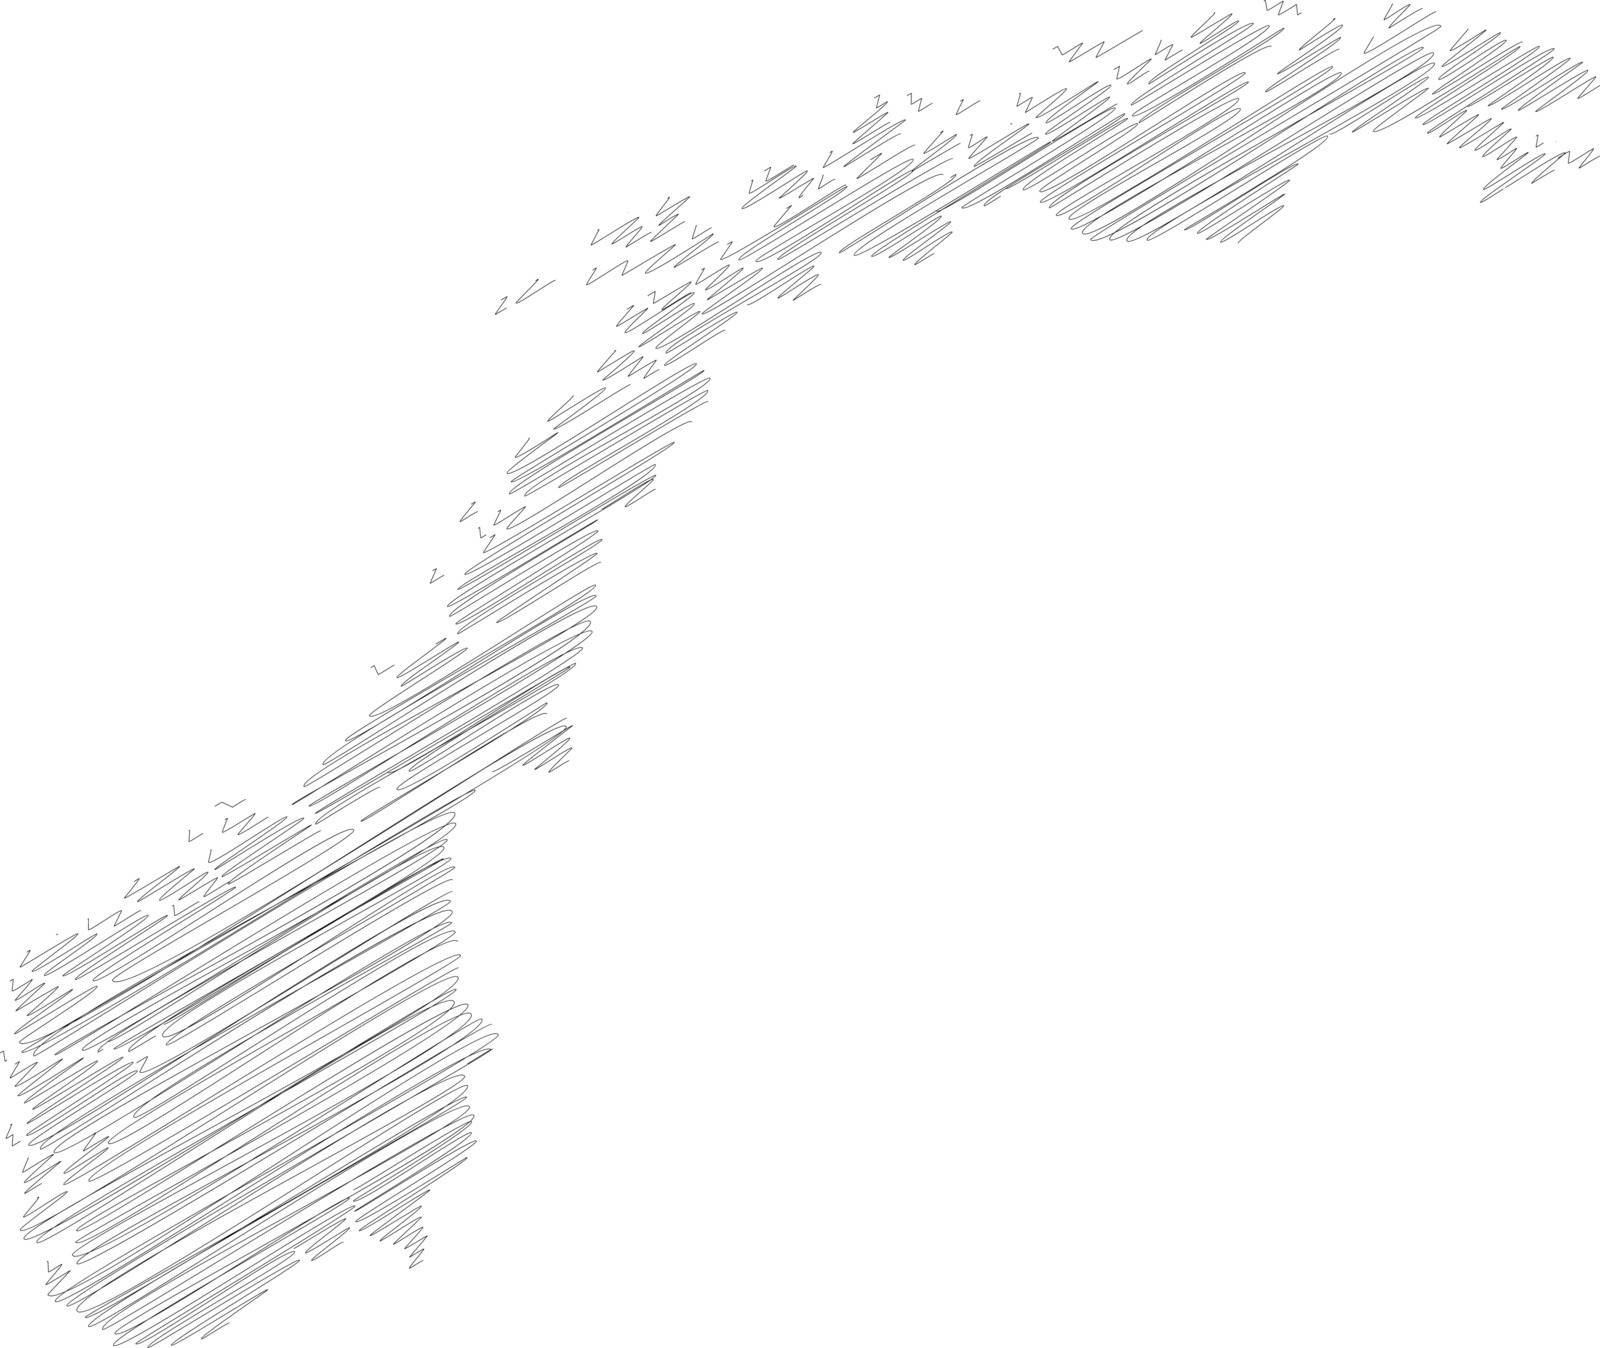 Norway - pencil scribble sketch silhouette map of country area with dropped shadow. Simple flat vector illustration by pyty